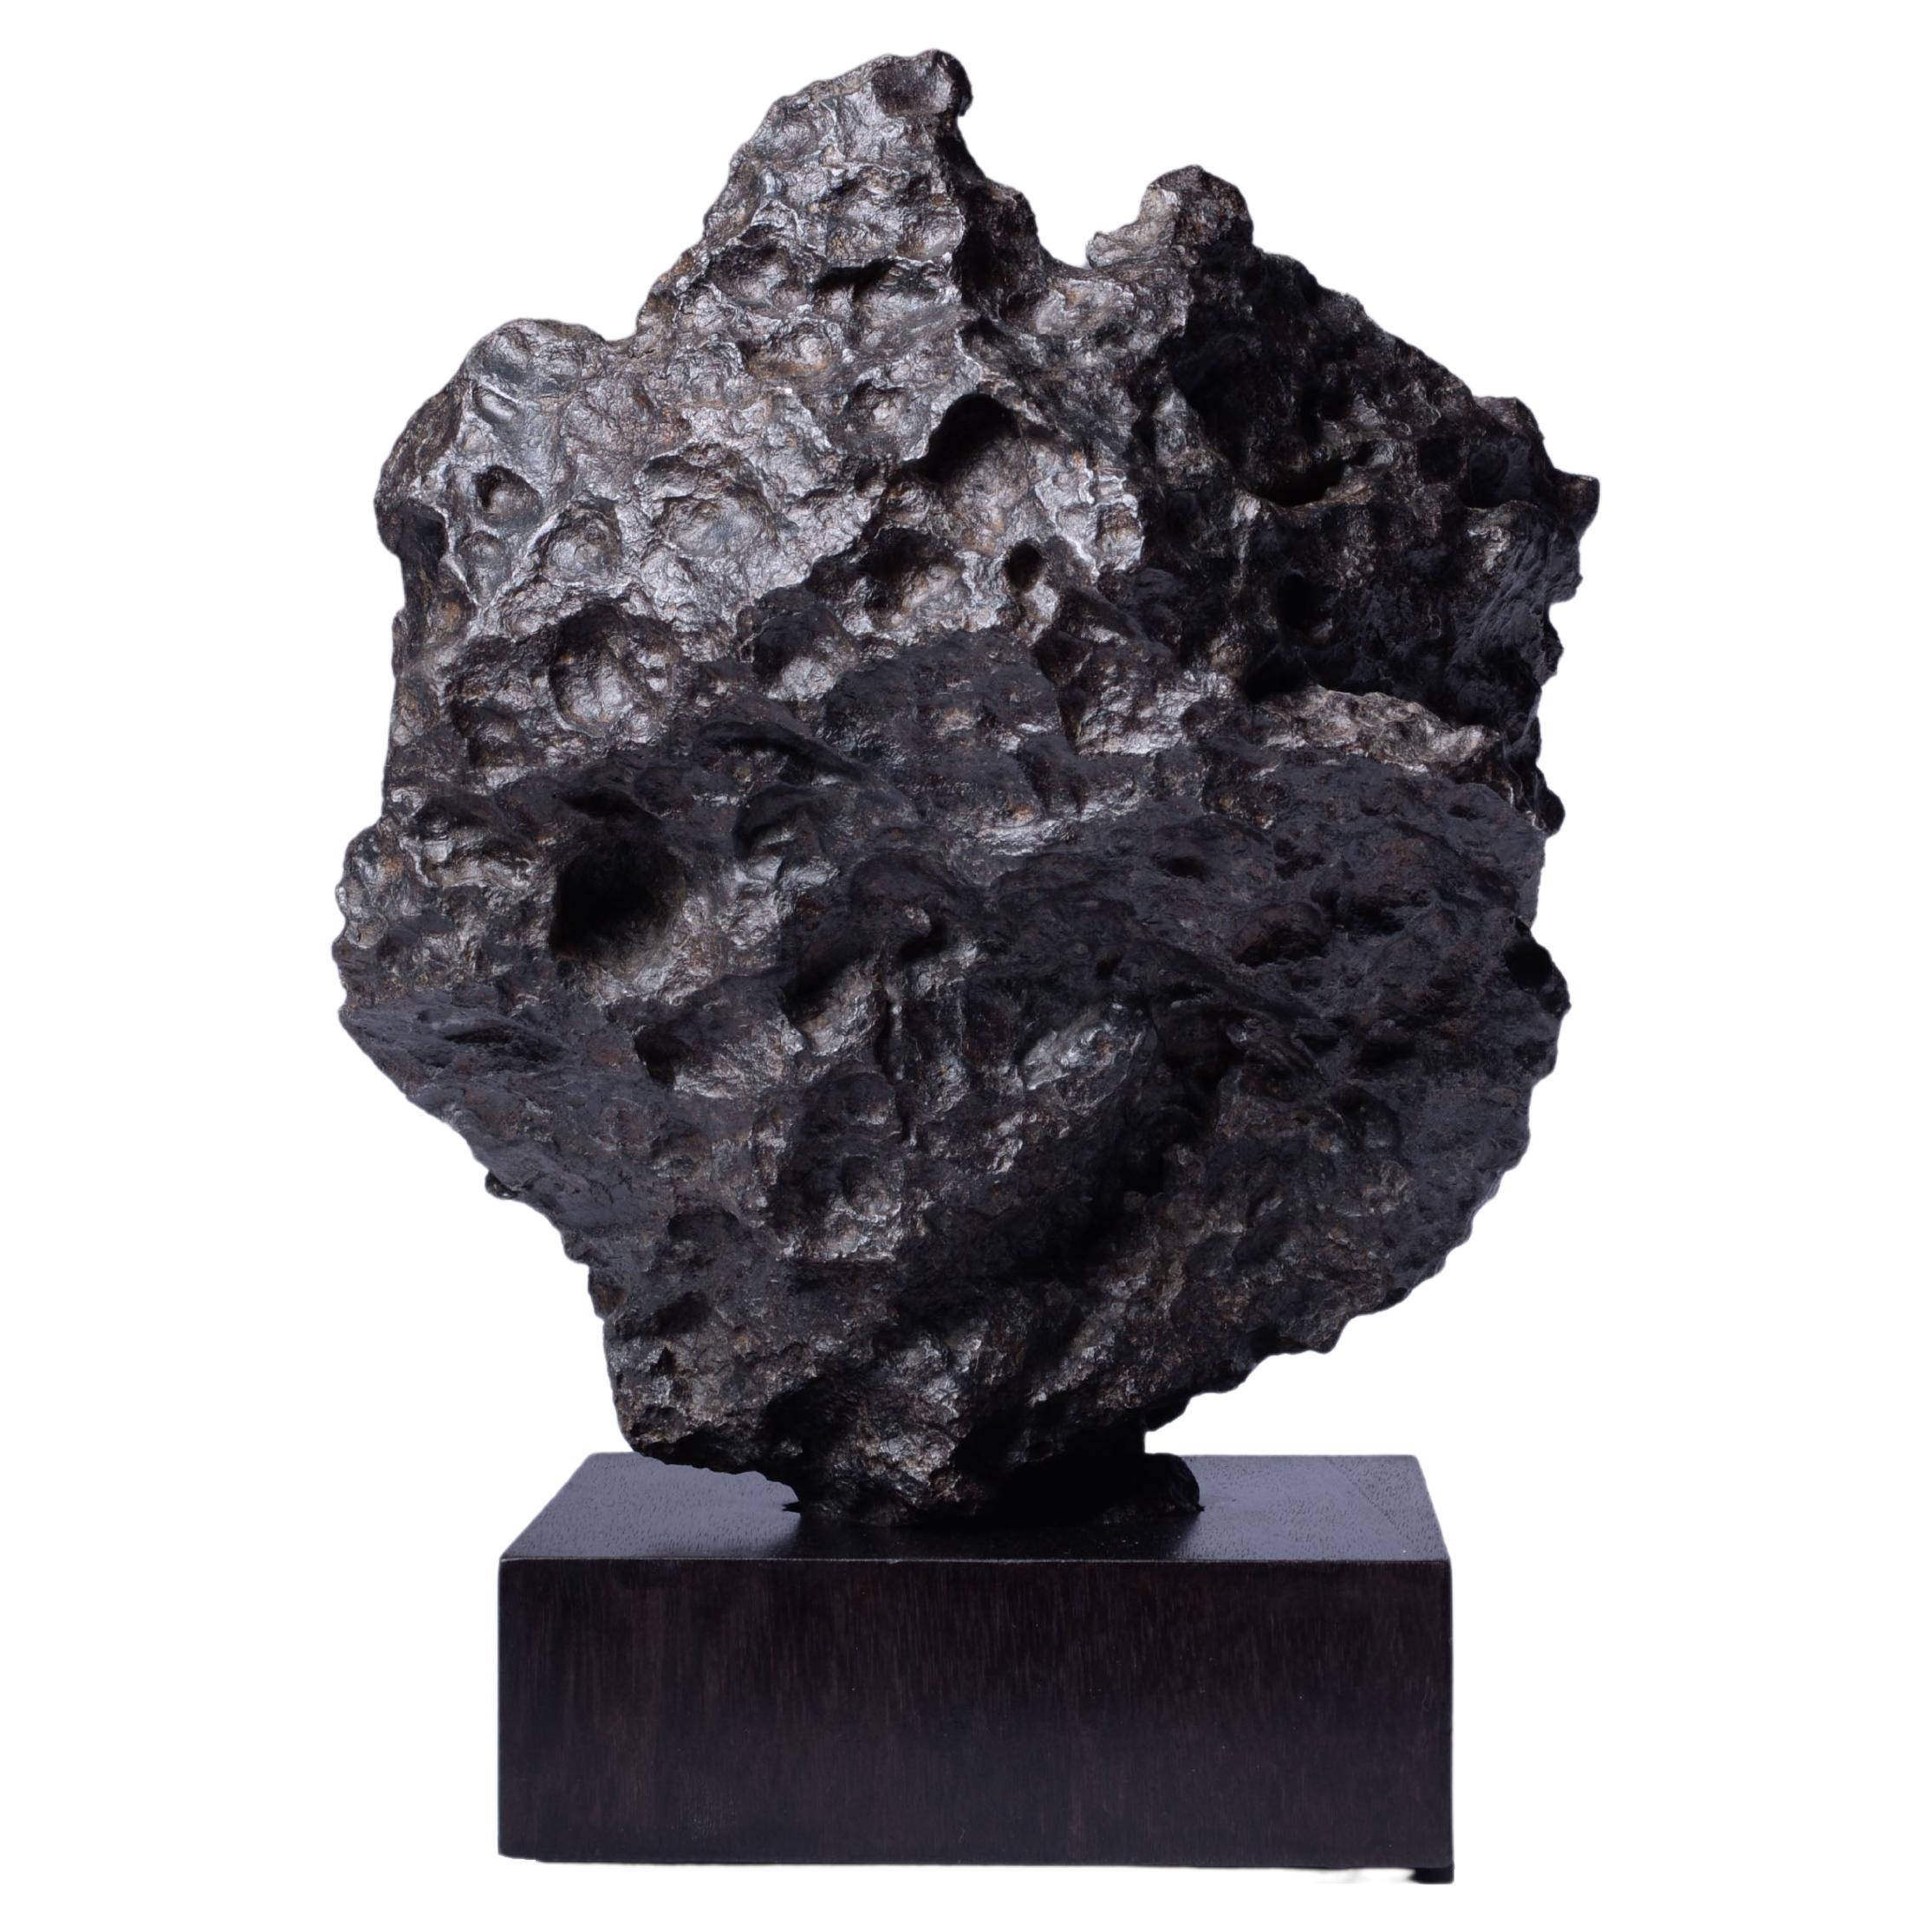 Sculptural Iron Meteorite from Morasko, Poland For Sale at 1stDibs